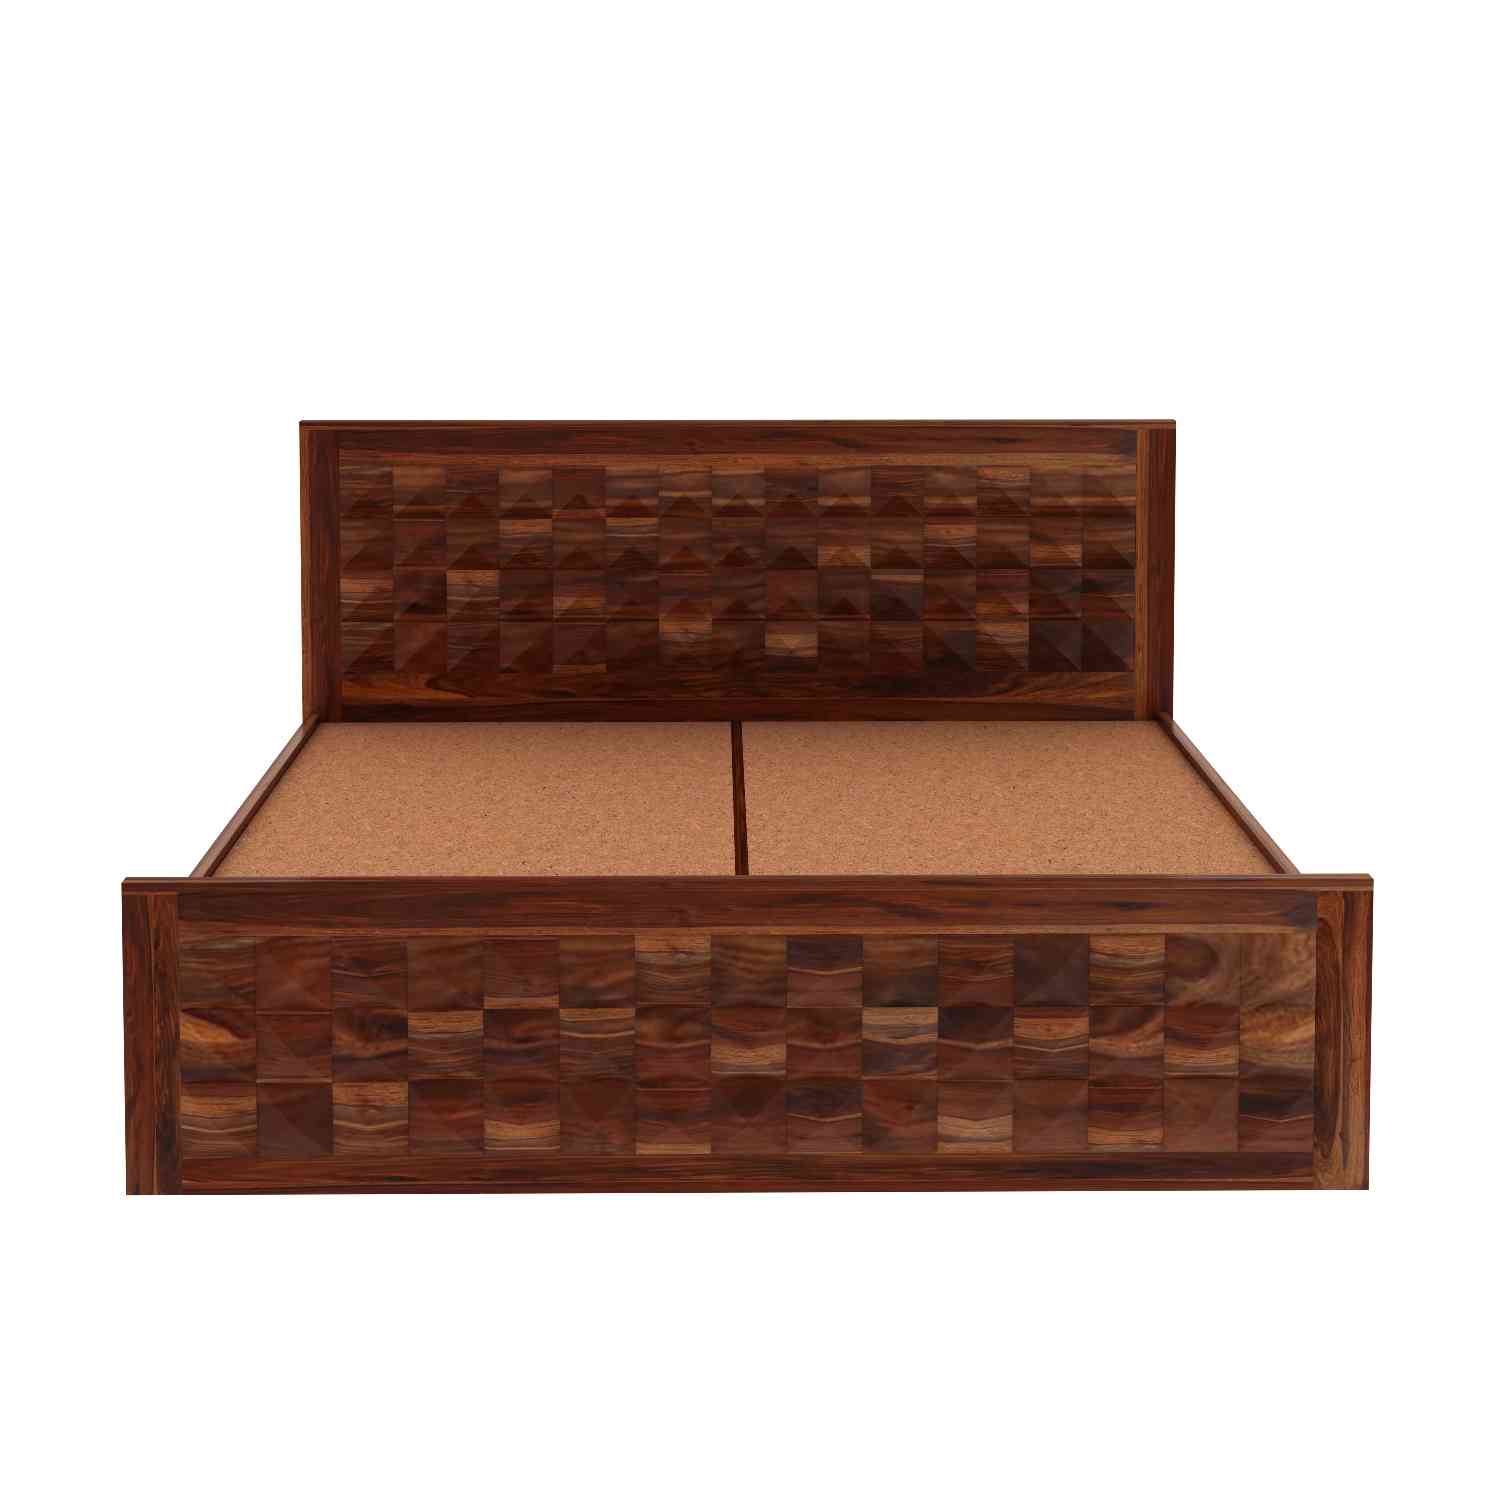 Sofia Solid Sheesham Wood Bed Without Storage (King Size, Natural Finish)